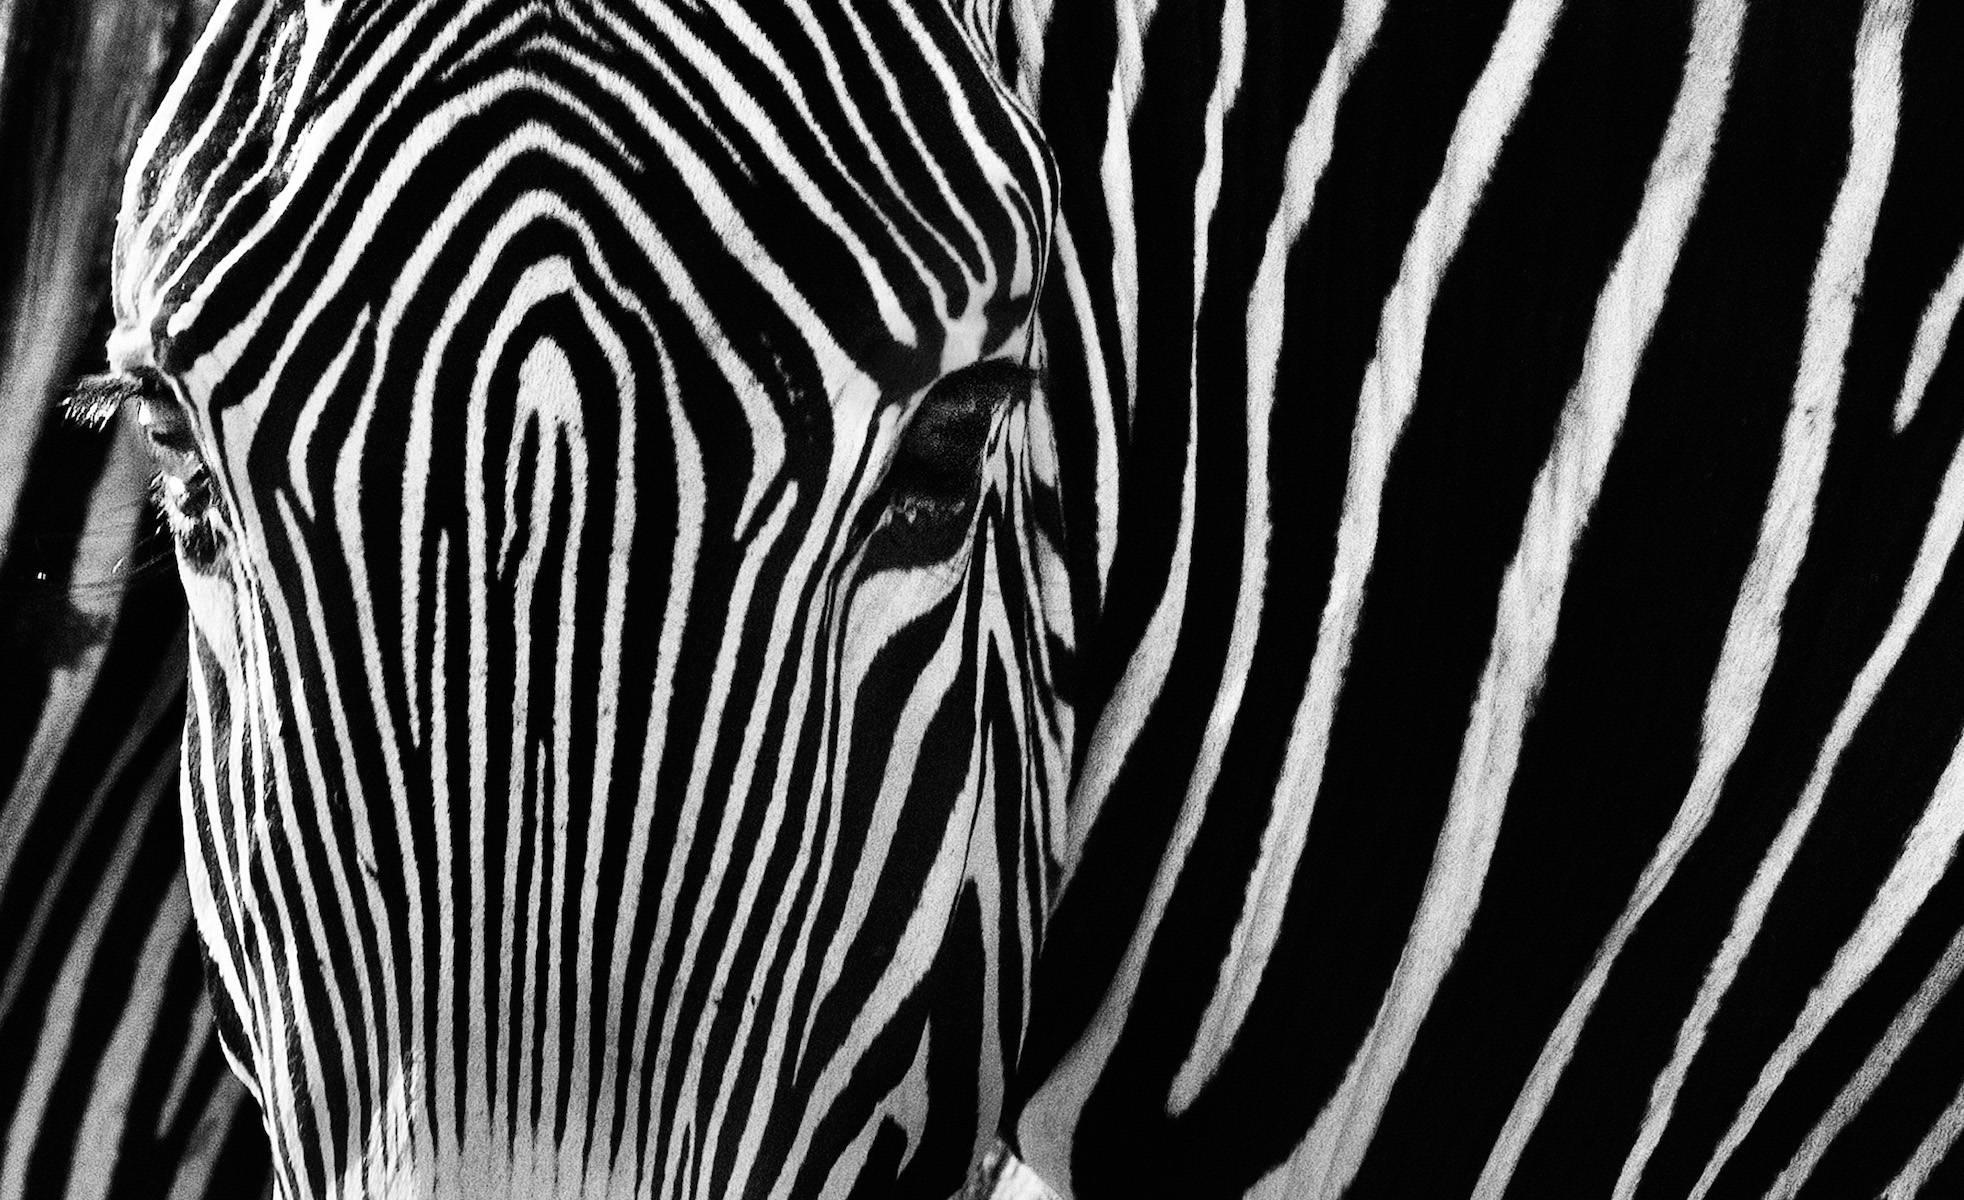 The Puzzle - Photograph by David Yarrow